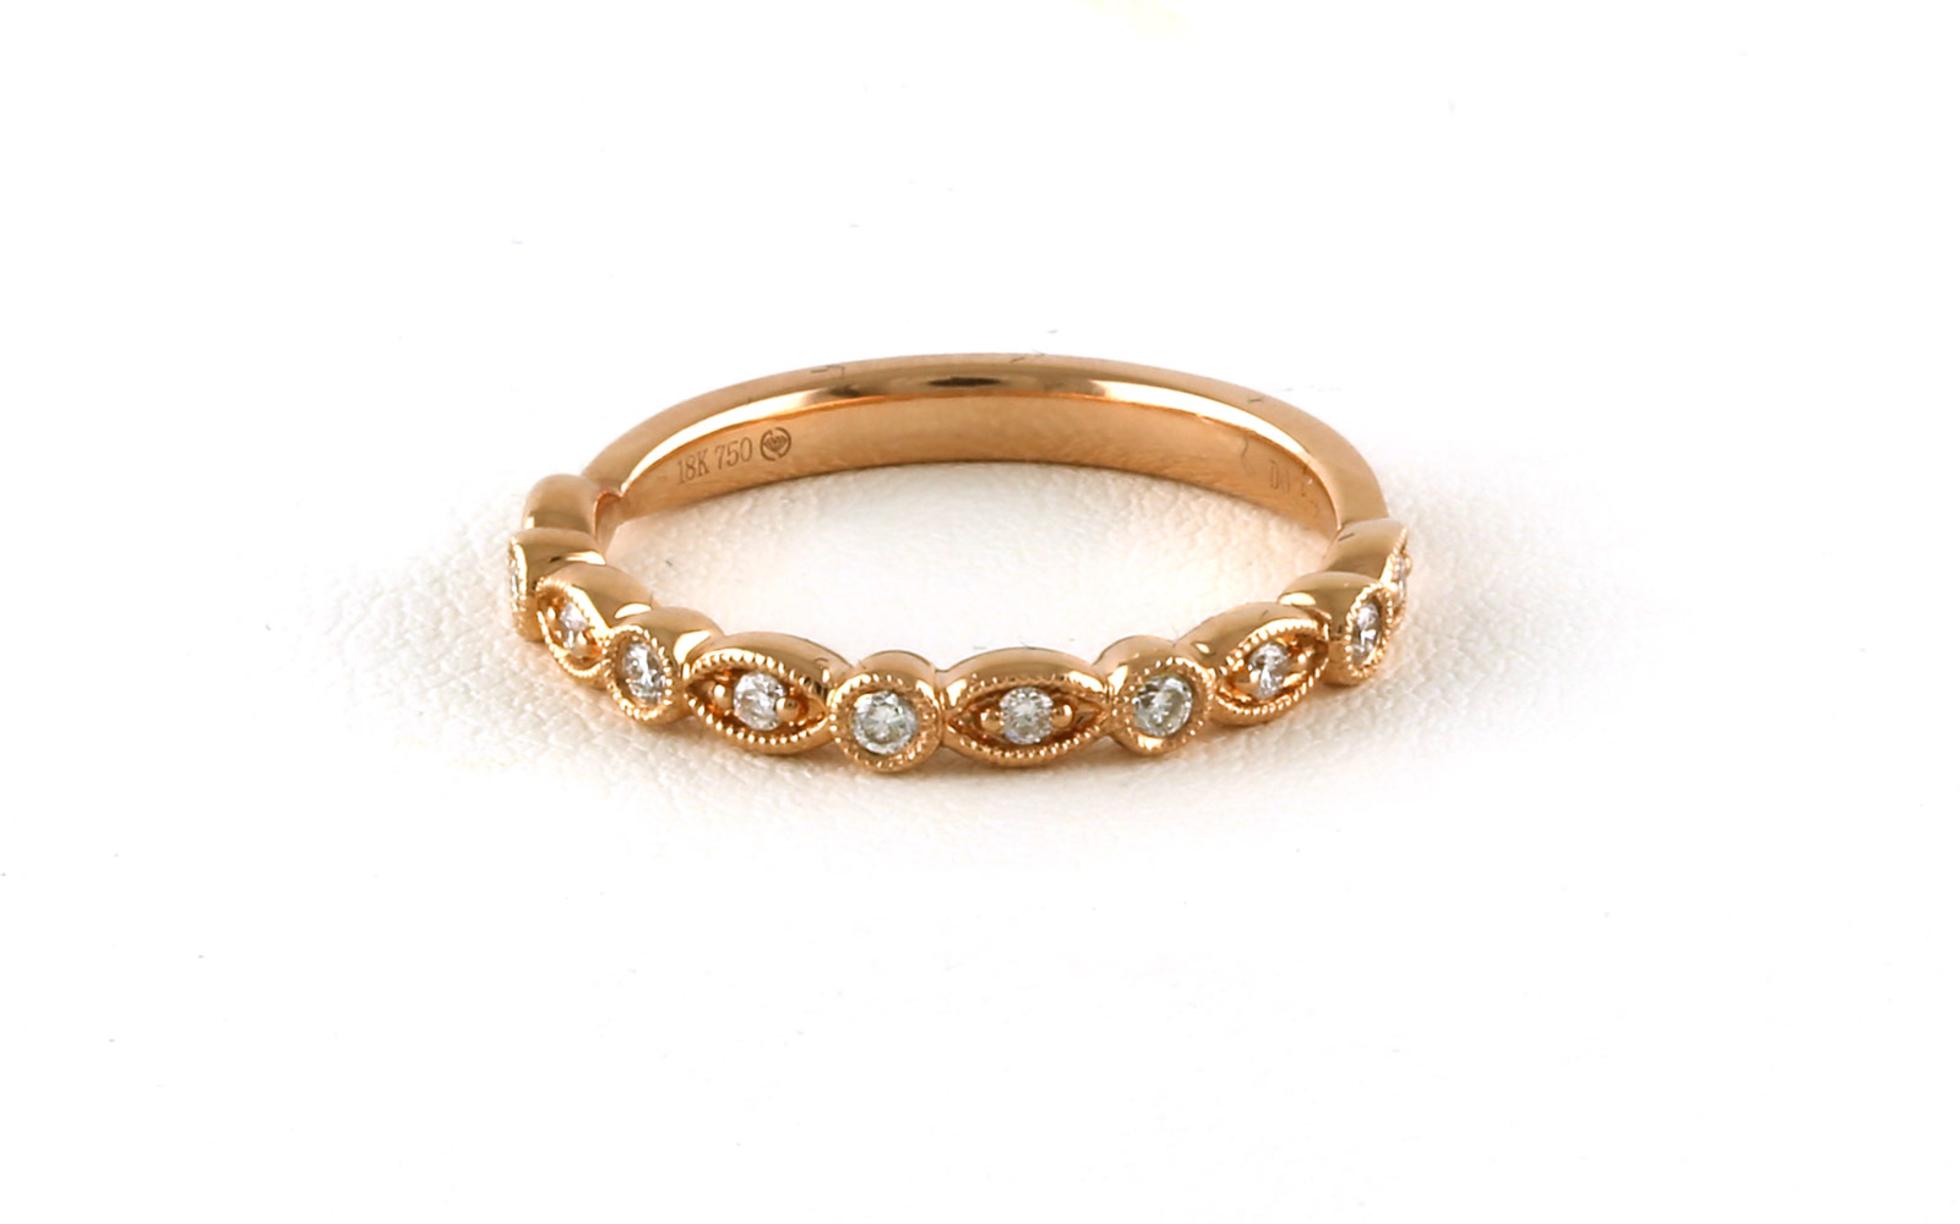 Scalloped Diamond Wedding Band with Milgrain Detail in Rose Gold